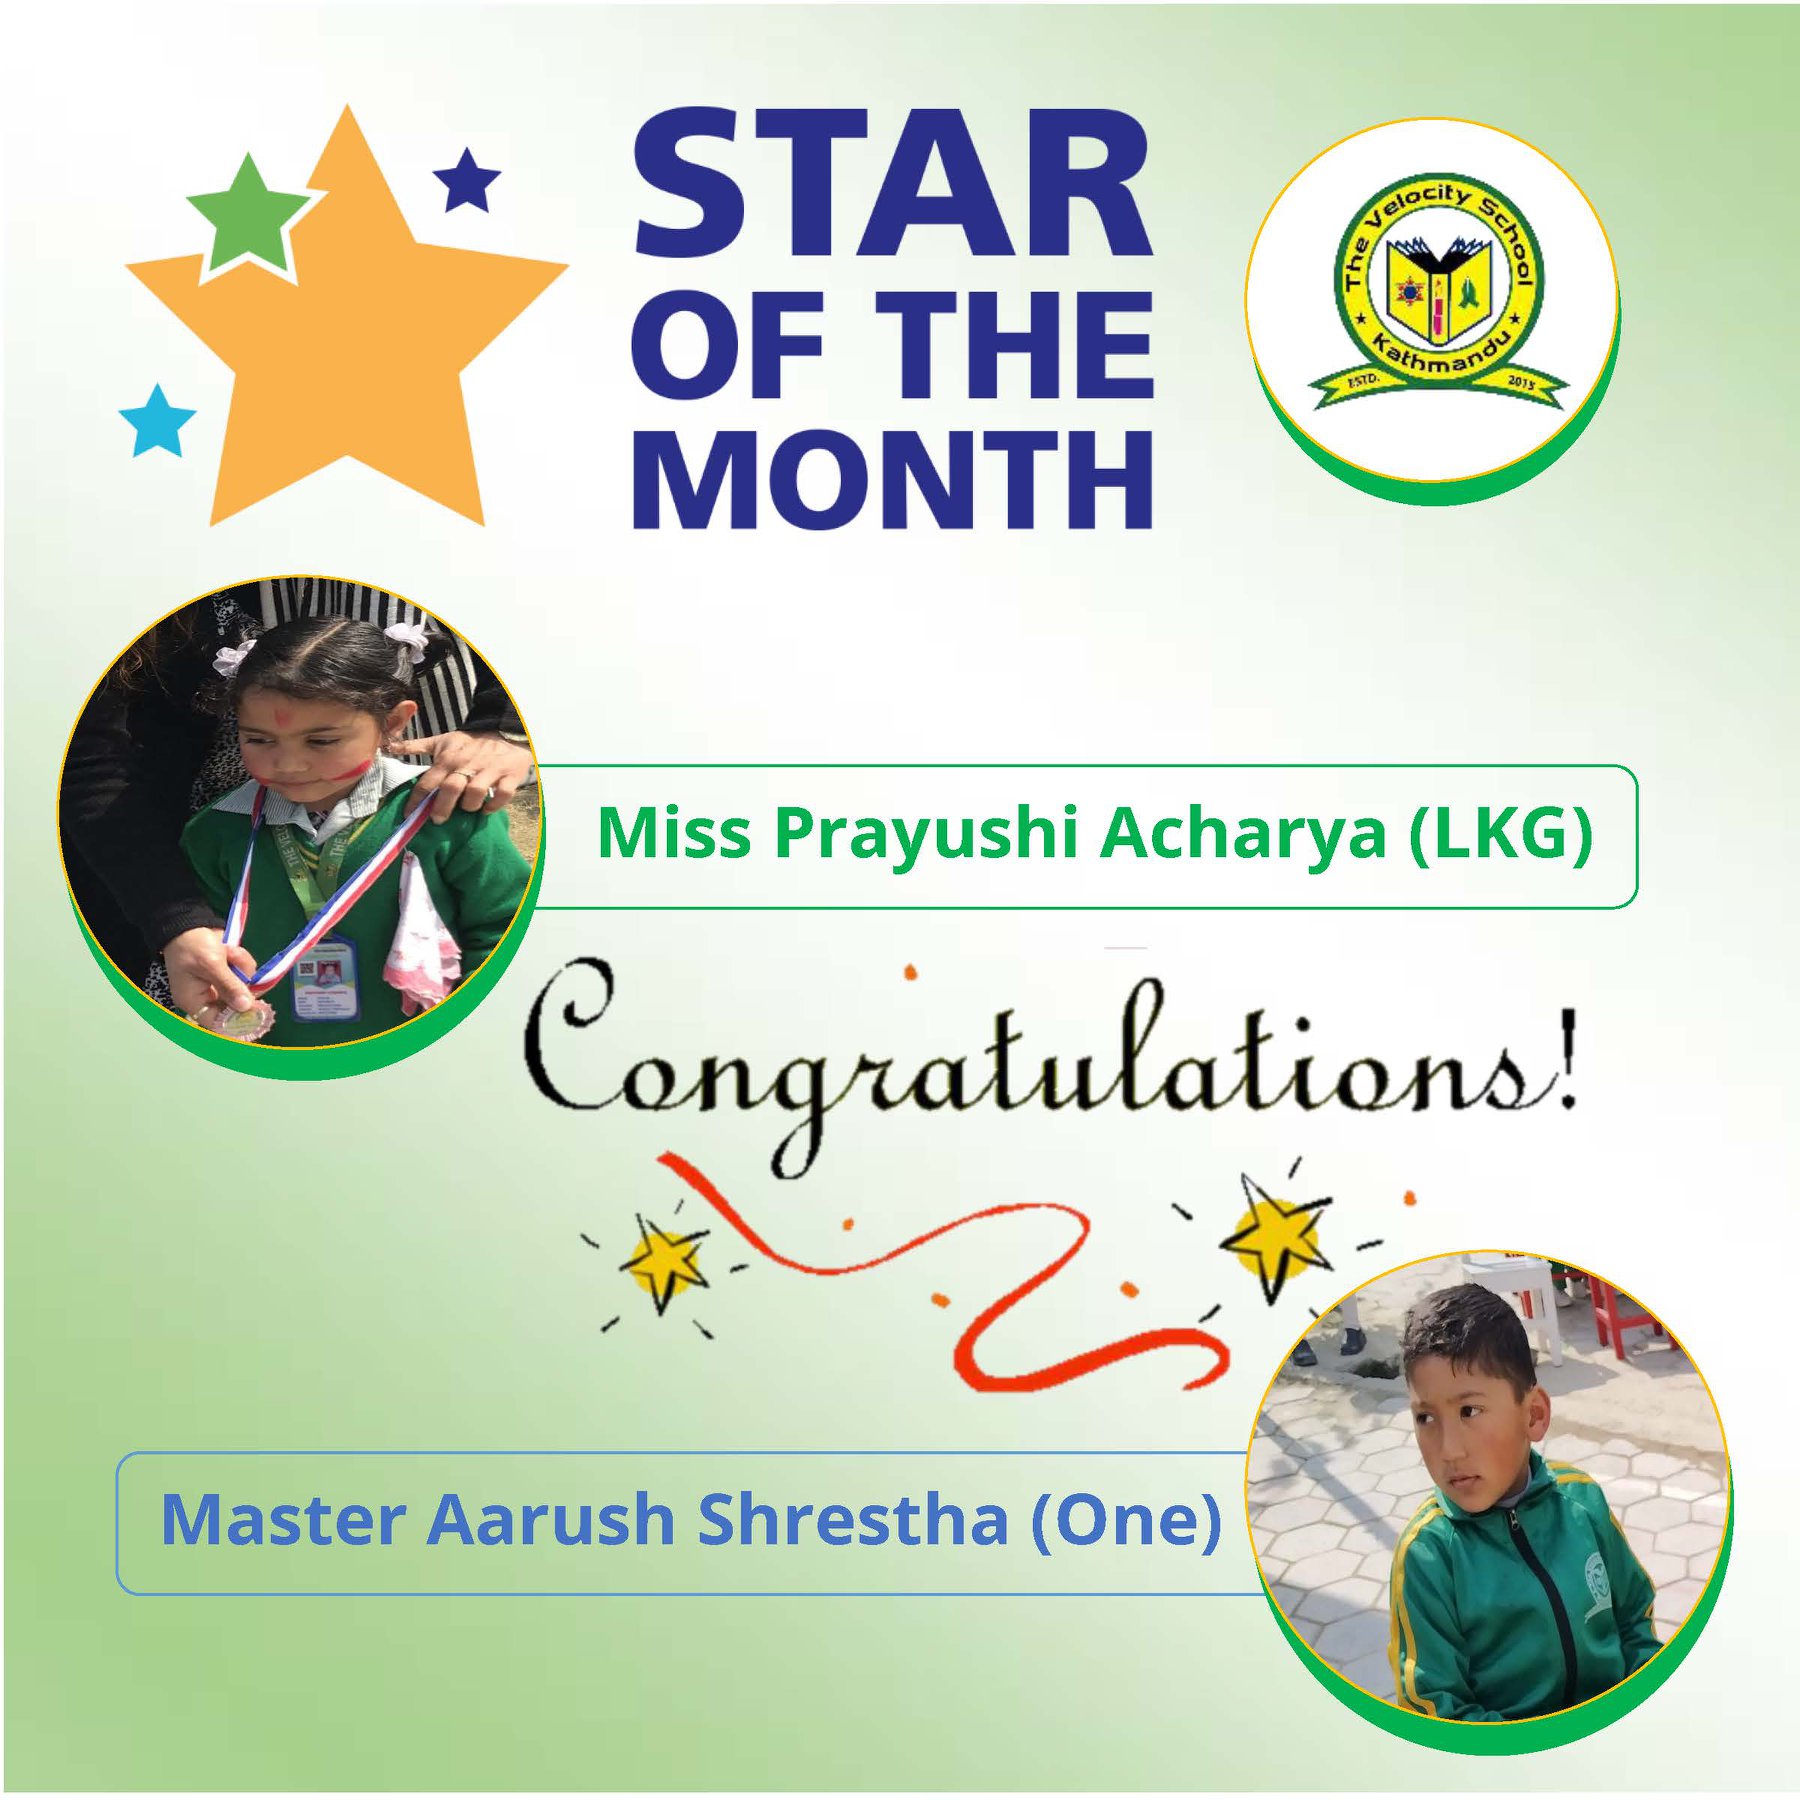 Star of the Month